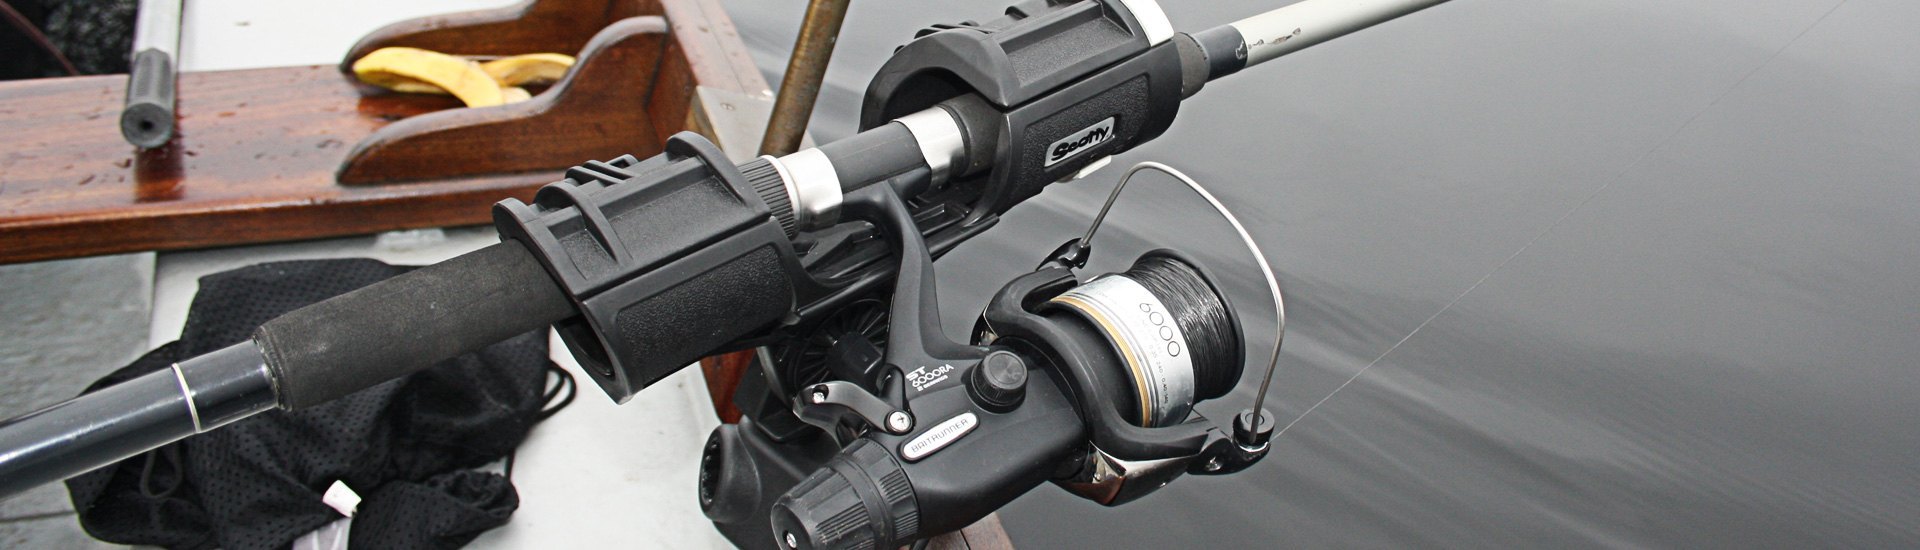 Fishing rods tamer Strap Saver Fishing Rod Storage for Boat Canoe  Attachments - AliExpress